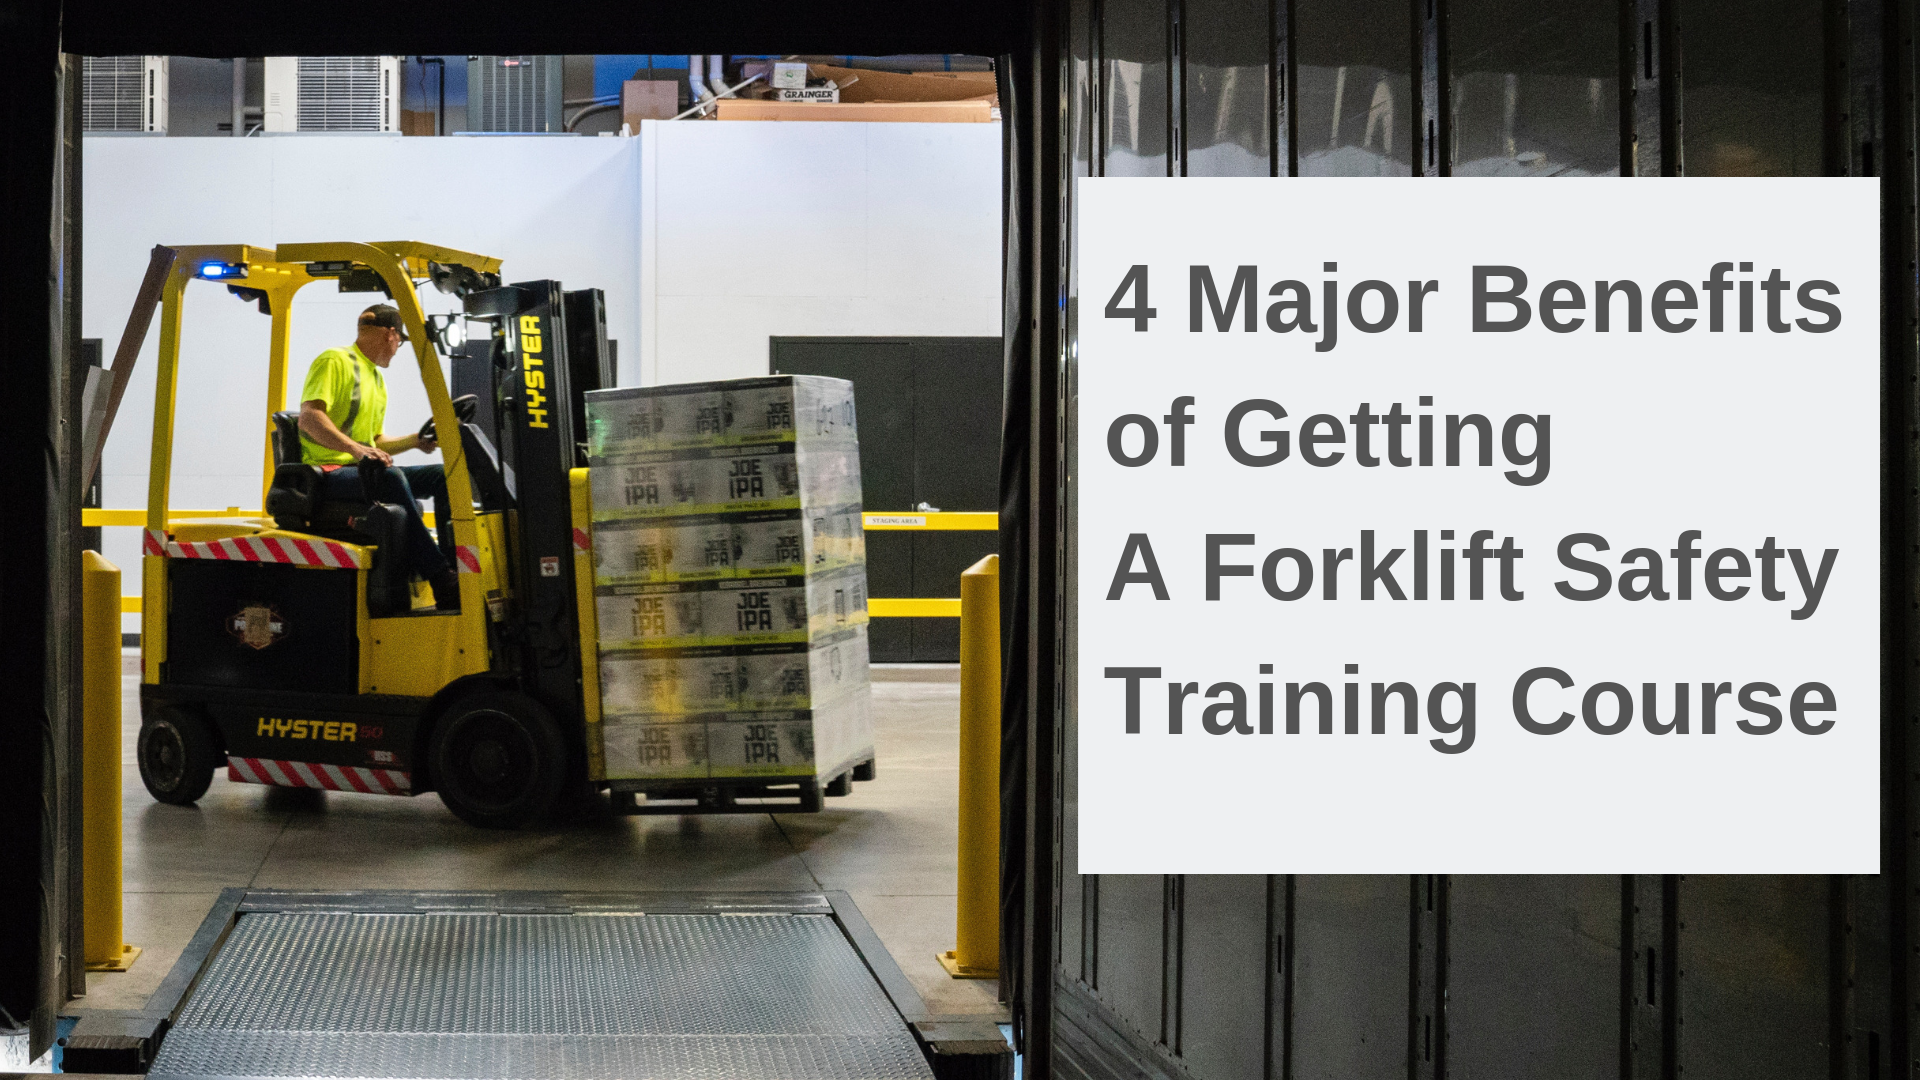 4 Major Benefits of Getting A Forklift Safety Training Course